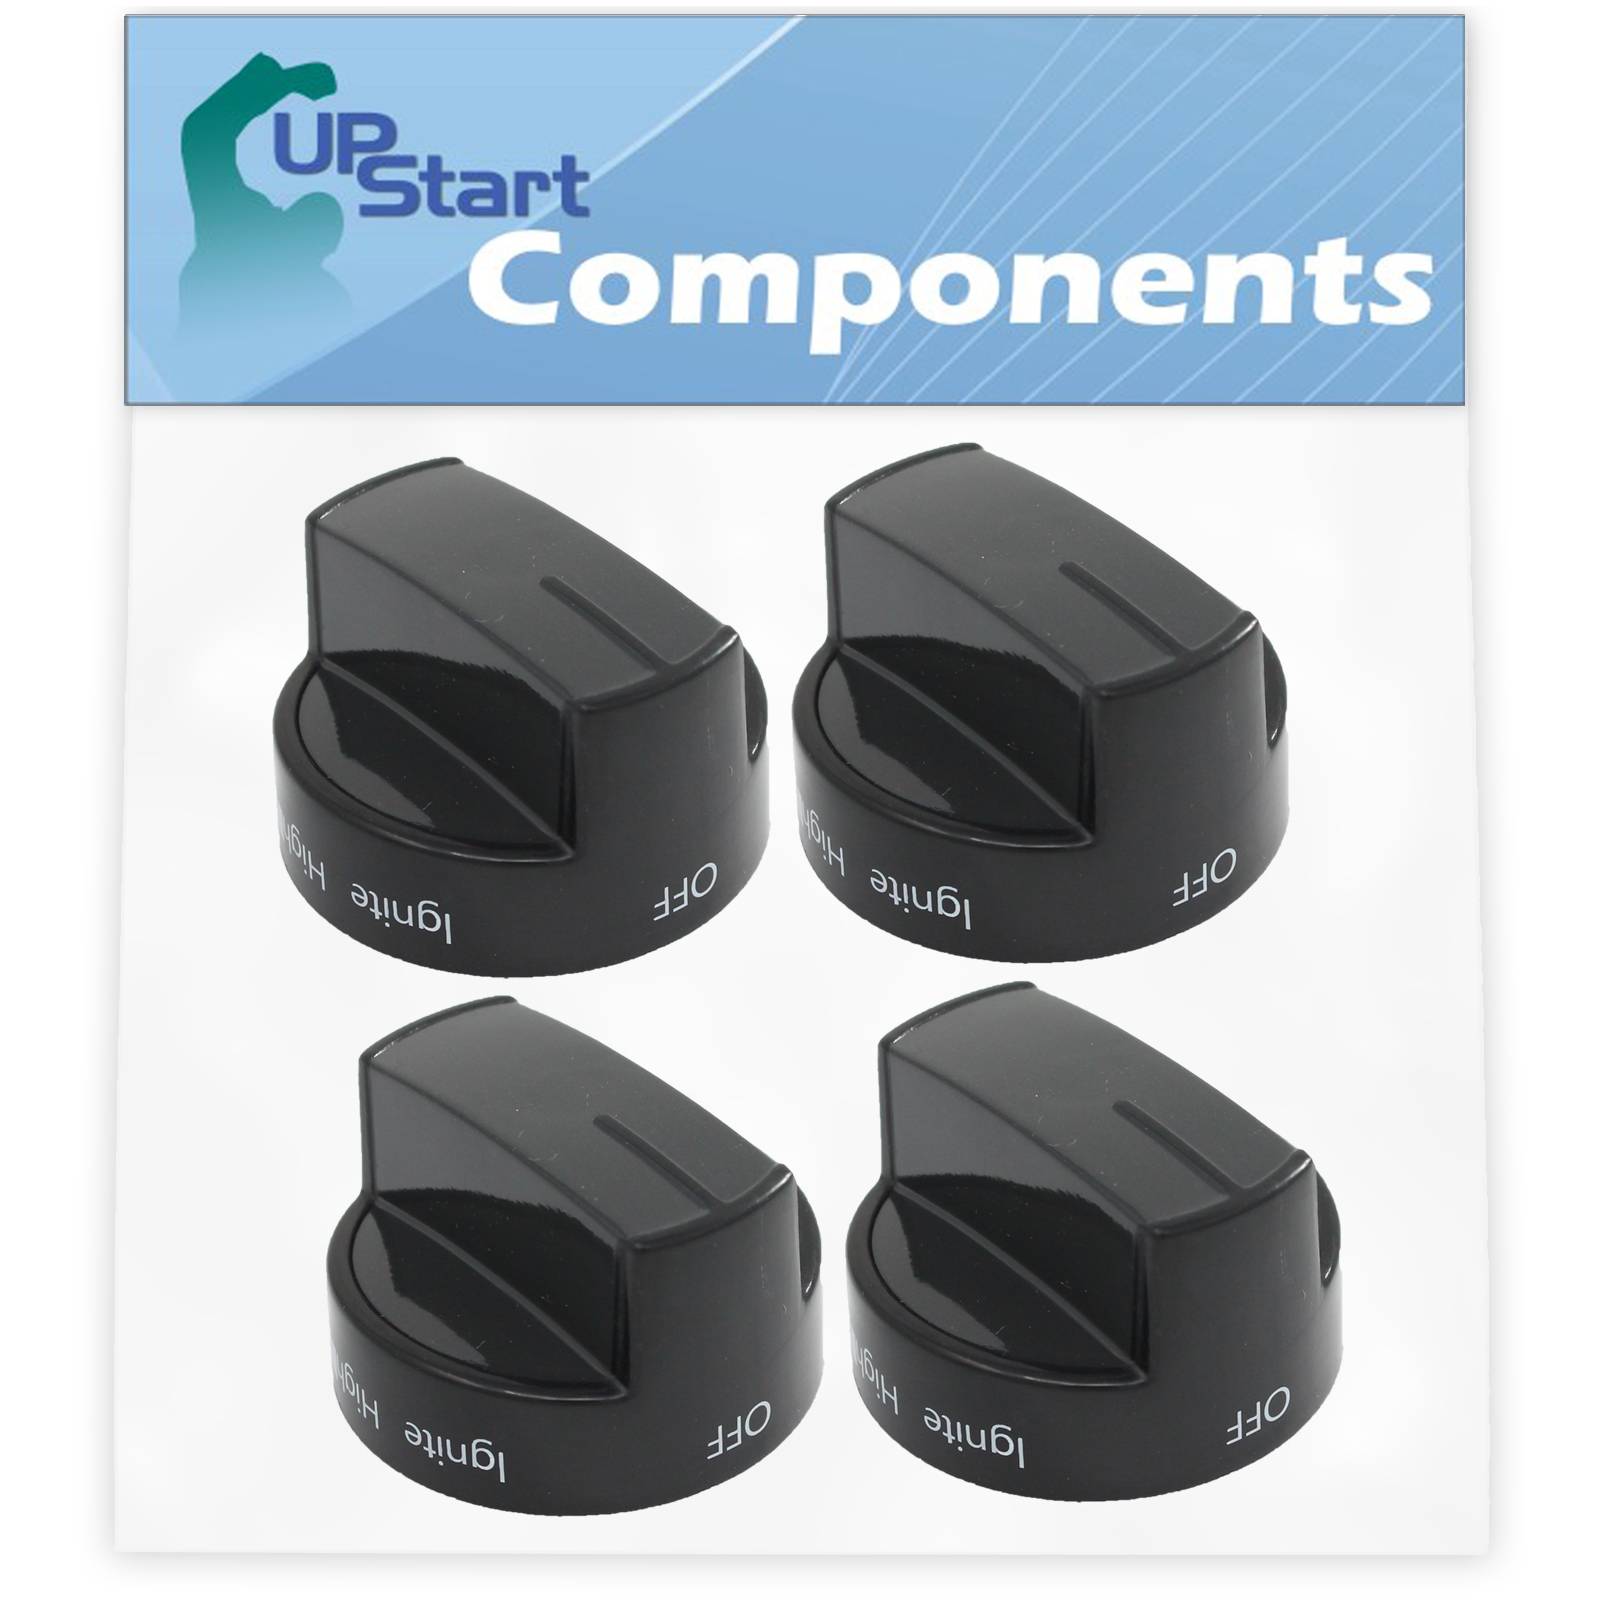 4-Pack W10339442 Range Knob Replacement for Part Number AP6019877 Range - Compatible with WPW10339442 Ranges/Stove/Oven Knob - UpStart Components Brand - image 1 of 4